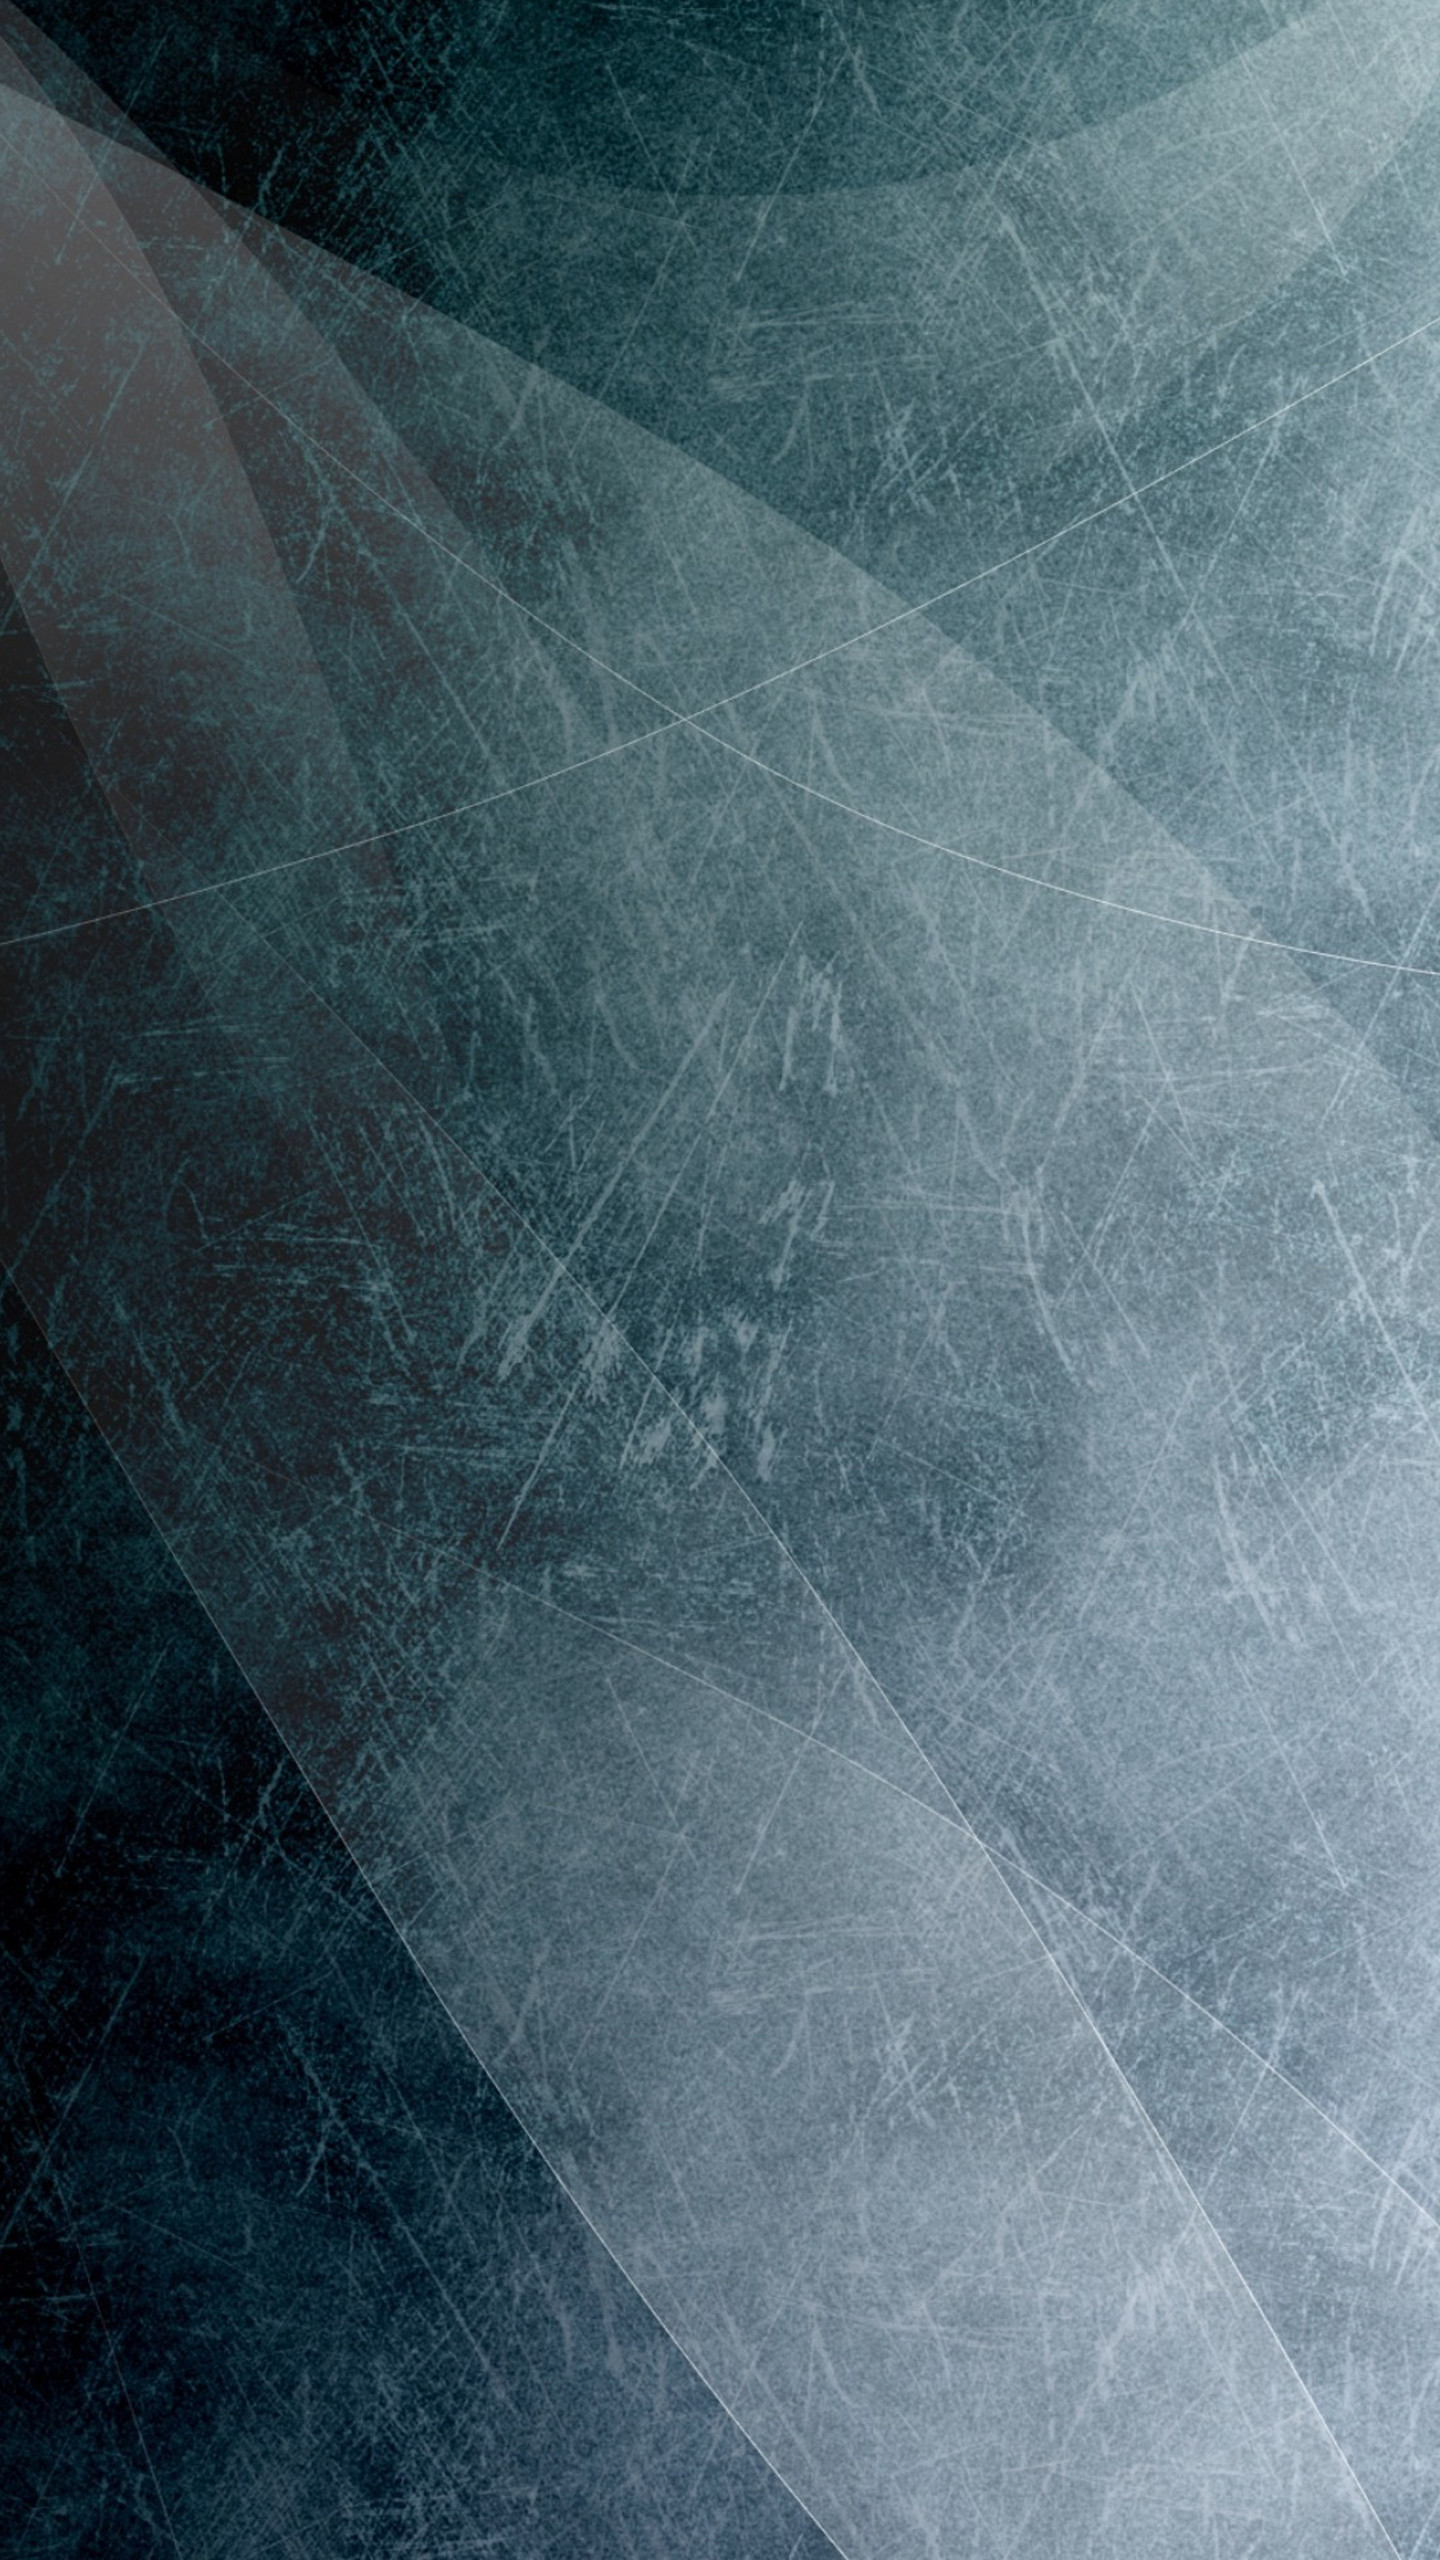 1440x2560 Download the Android Erased Surface wallpaper